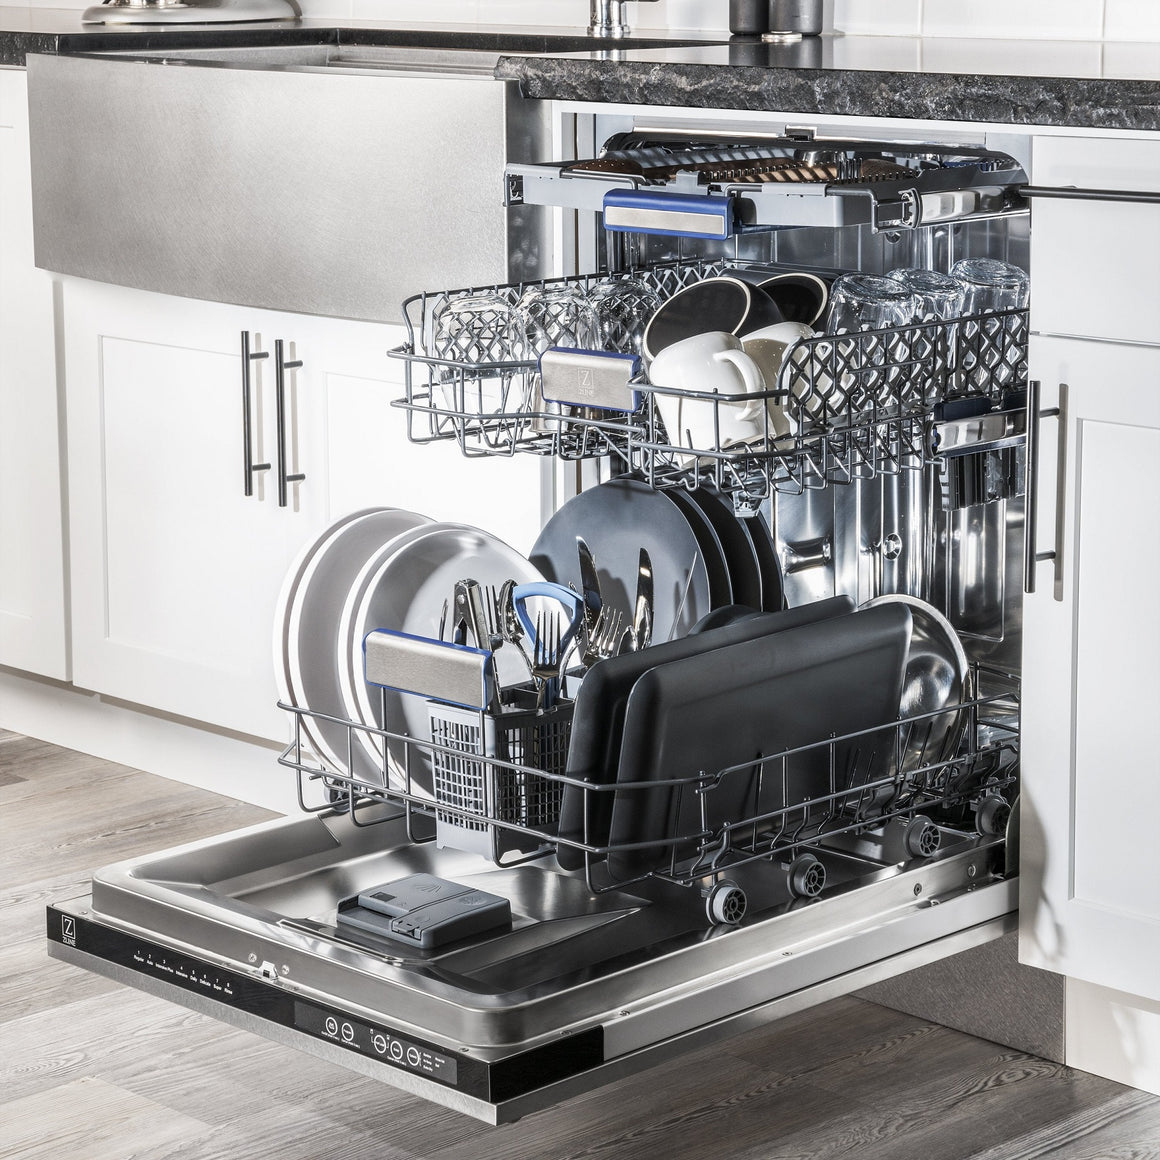 24" Top Control Tall Tub Dishwasher in DuraSnow® with Stainless Steel Tub and 3rd Rack (DWV-SN-24)